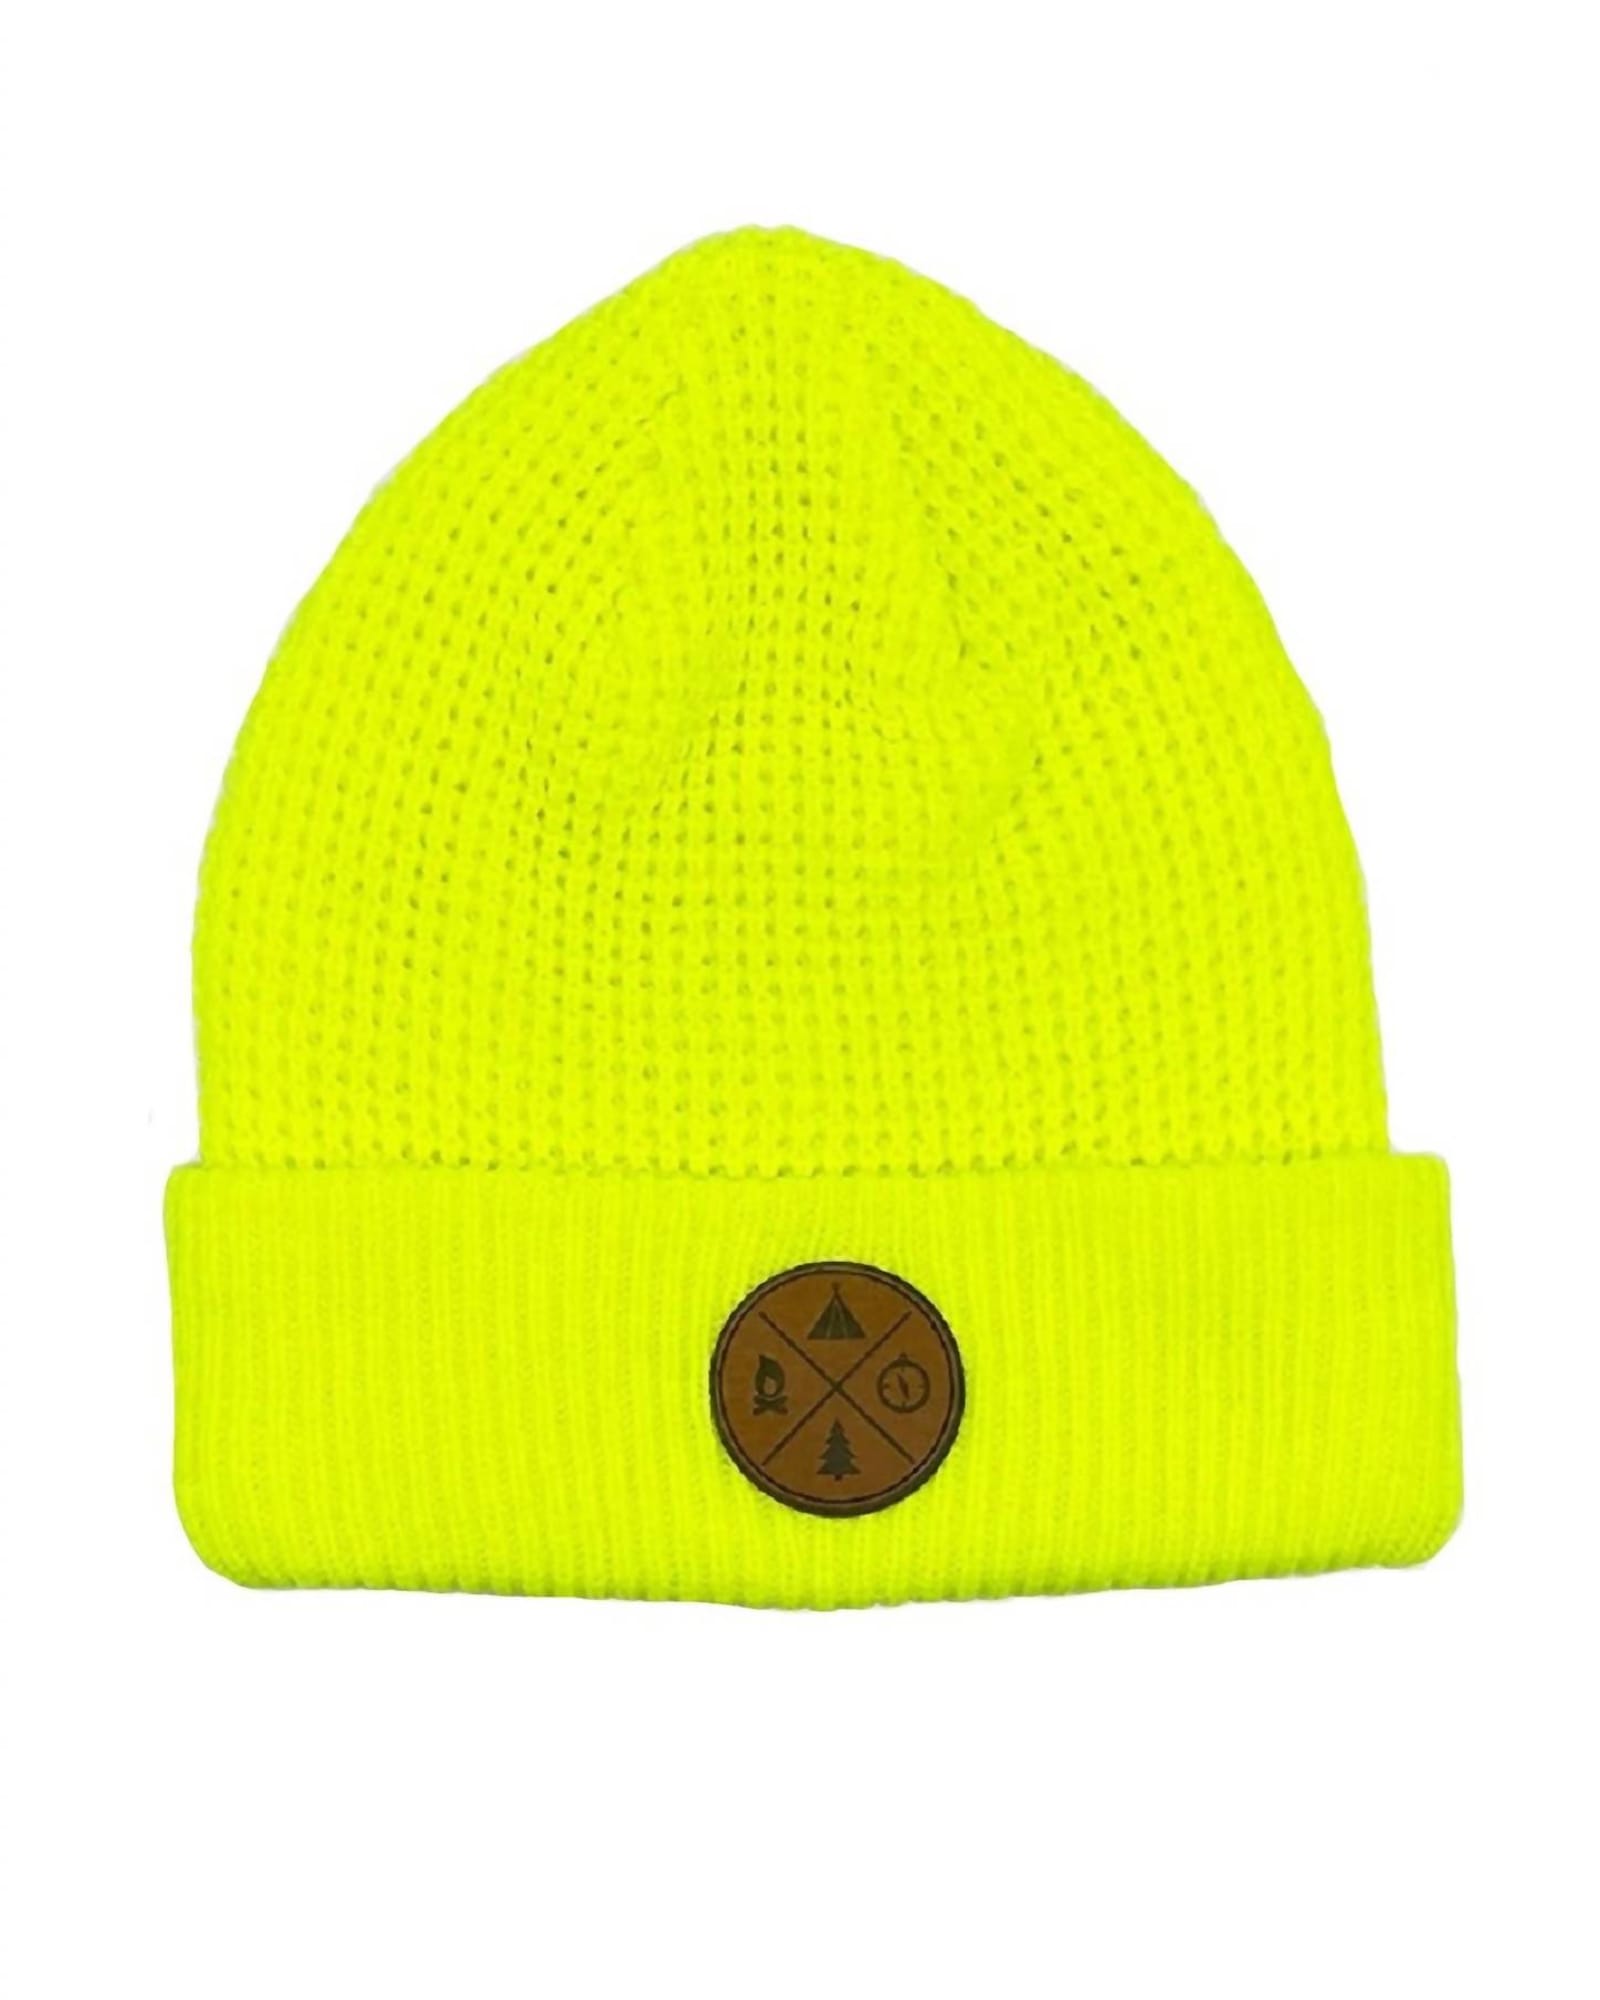 Camping Waffle Knit Cuffed Beanie In Bright Yellow | Bright Yellow